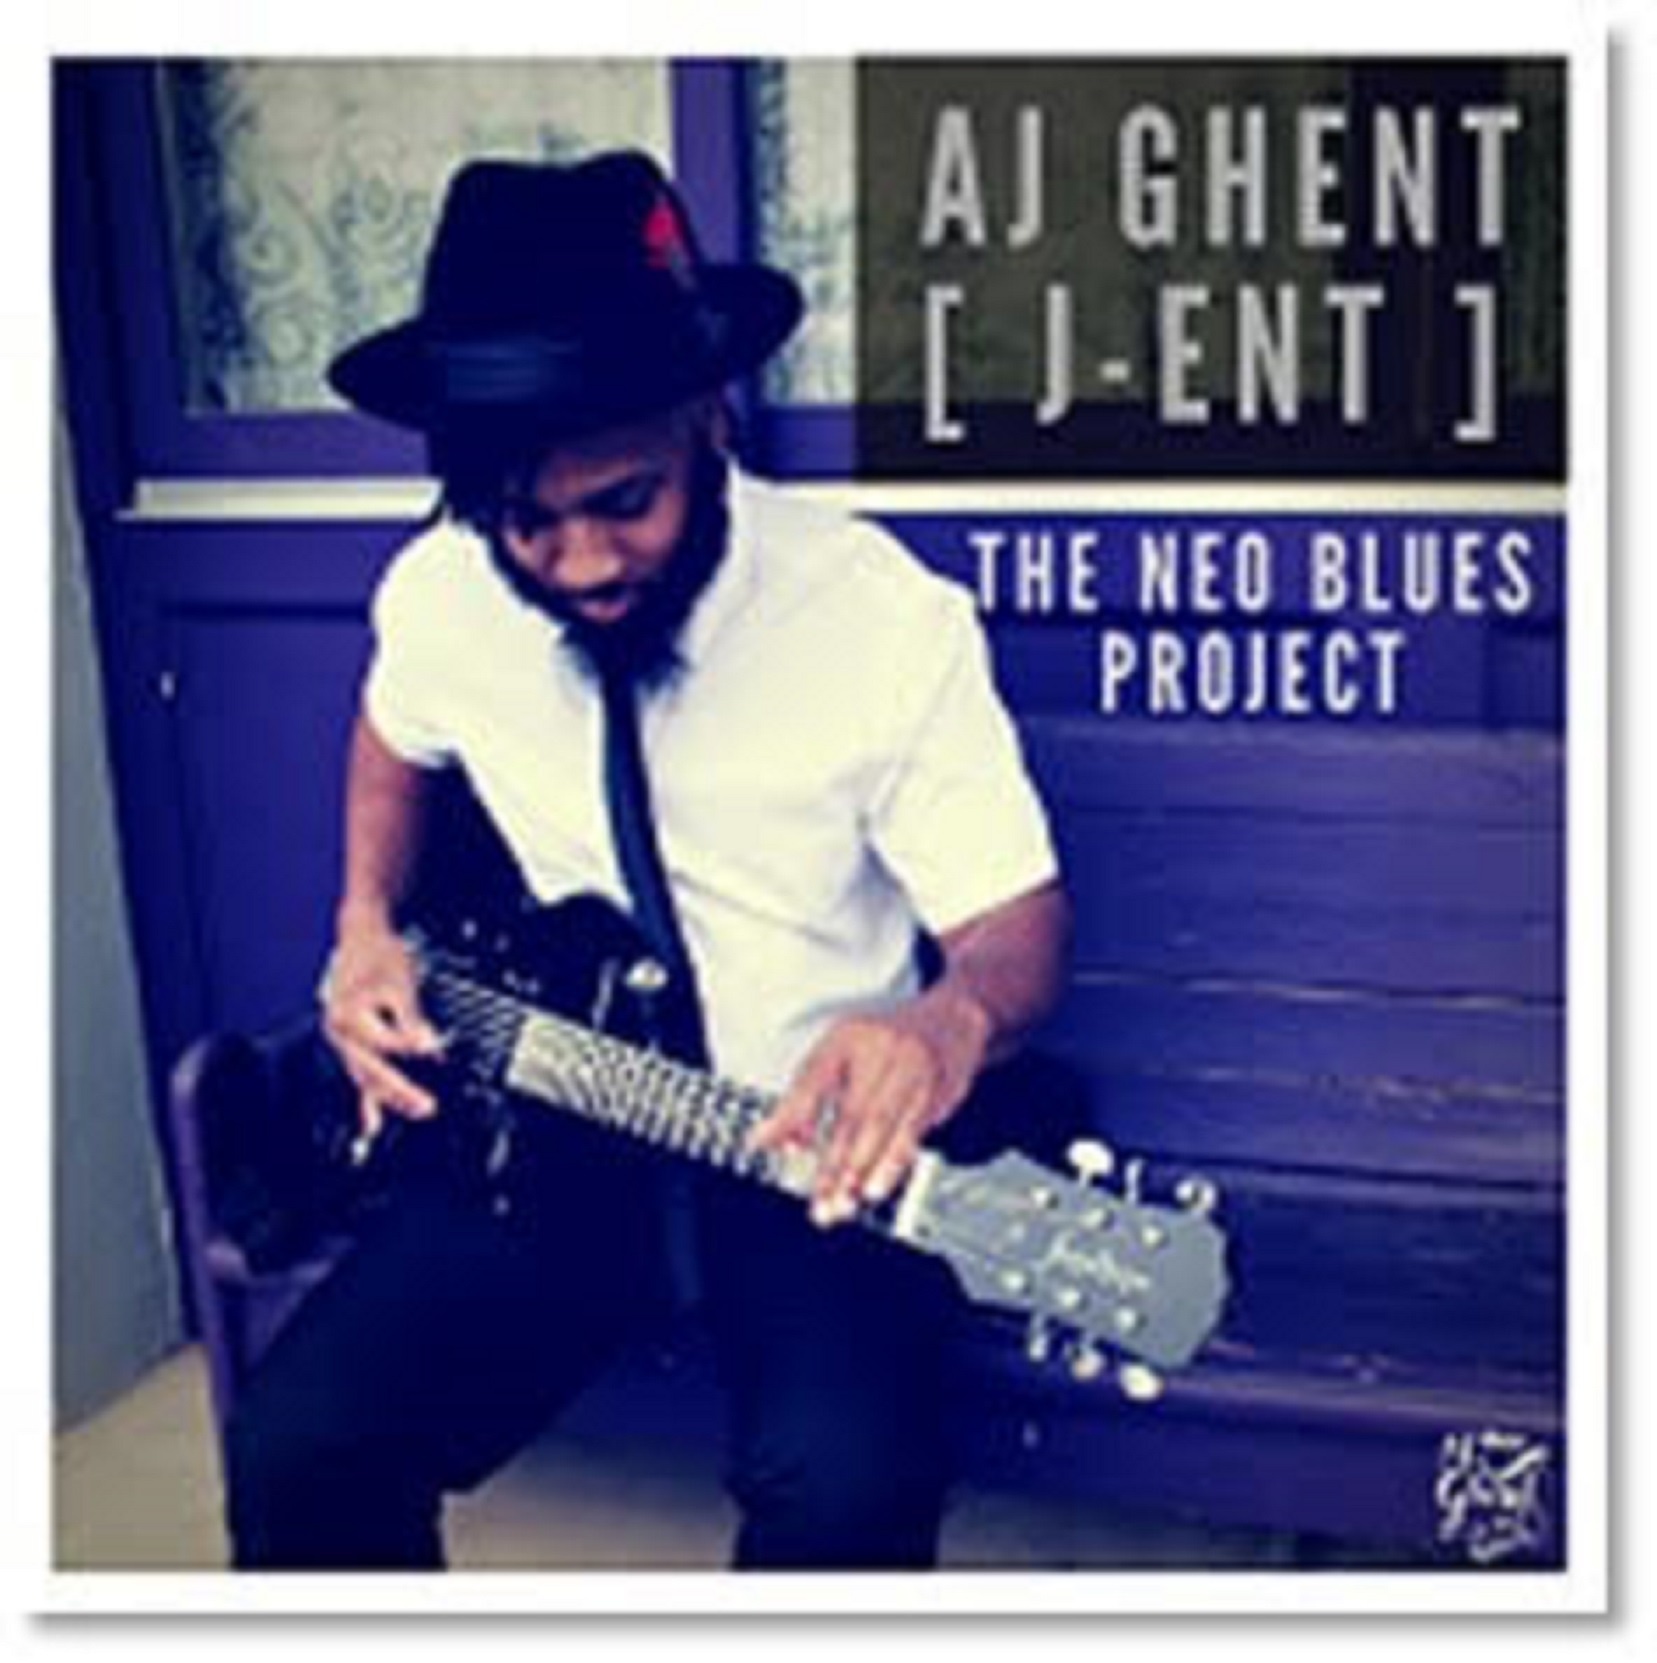 AJ GHENT [J-ent] THE NEO-BLUES PROJECT: OUT MARCH 16, 2018